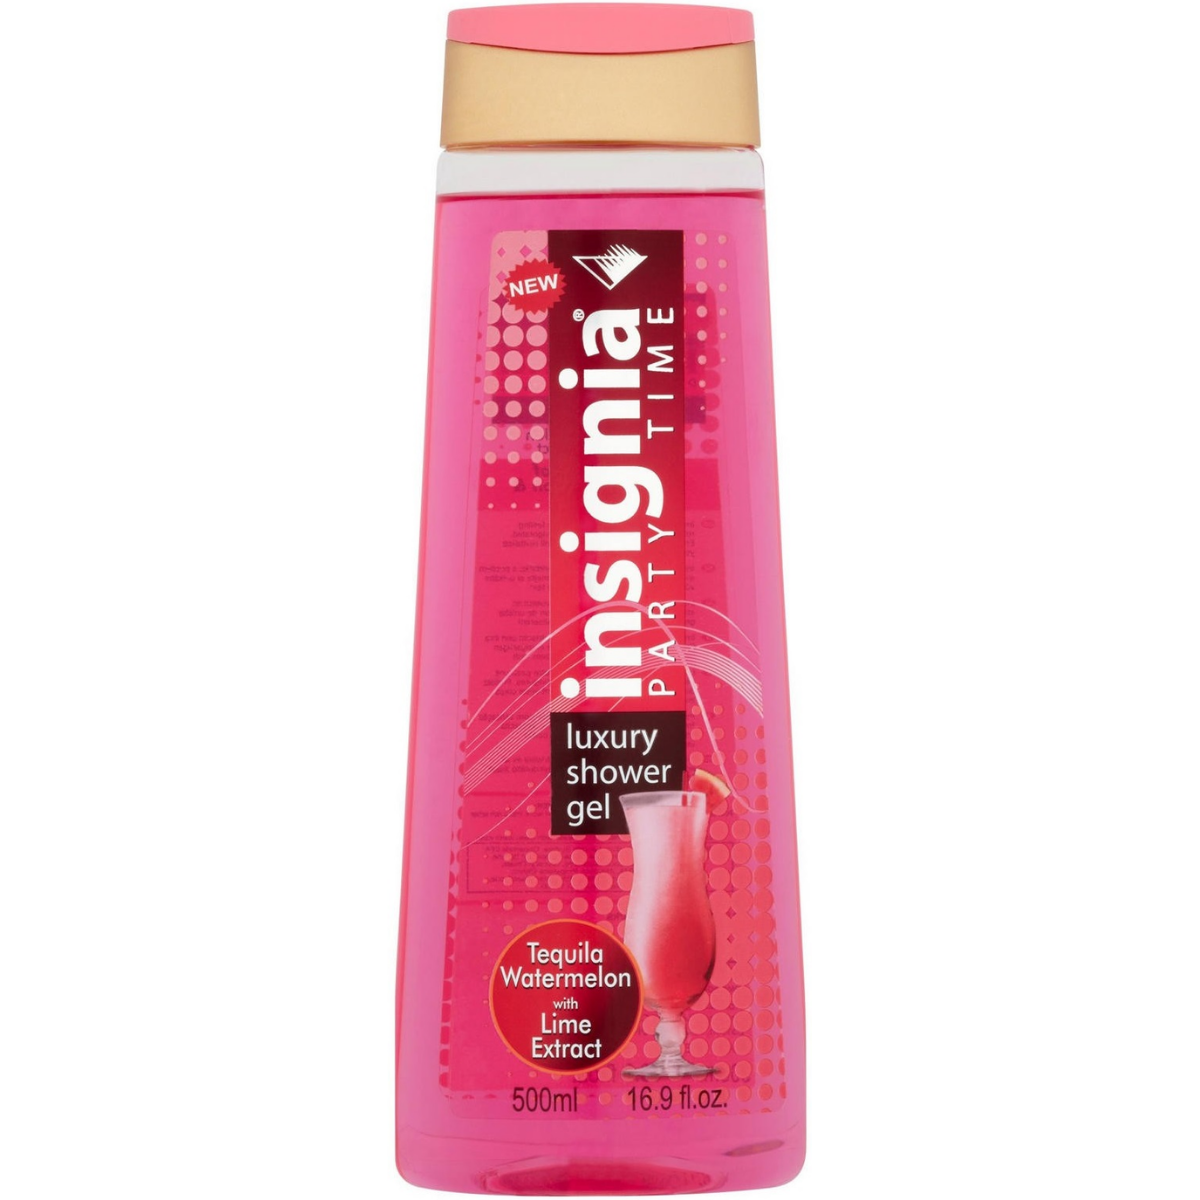 Insignia Party Time 500ml Shower Gel Tequila Watermelon With Lime Extract Αφρόλουτρο.